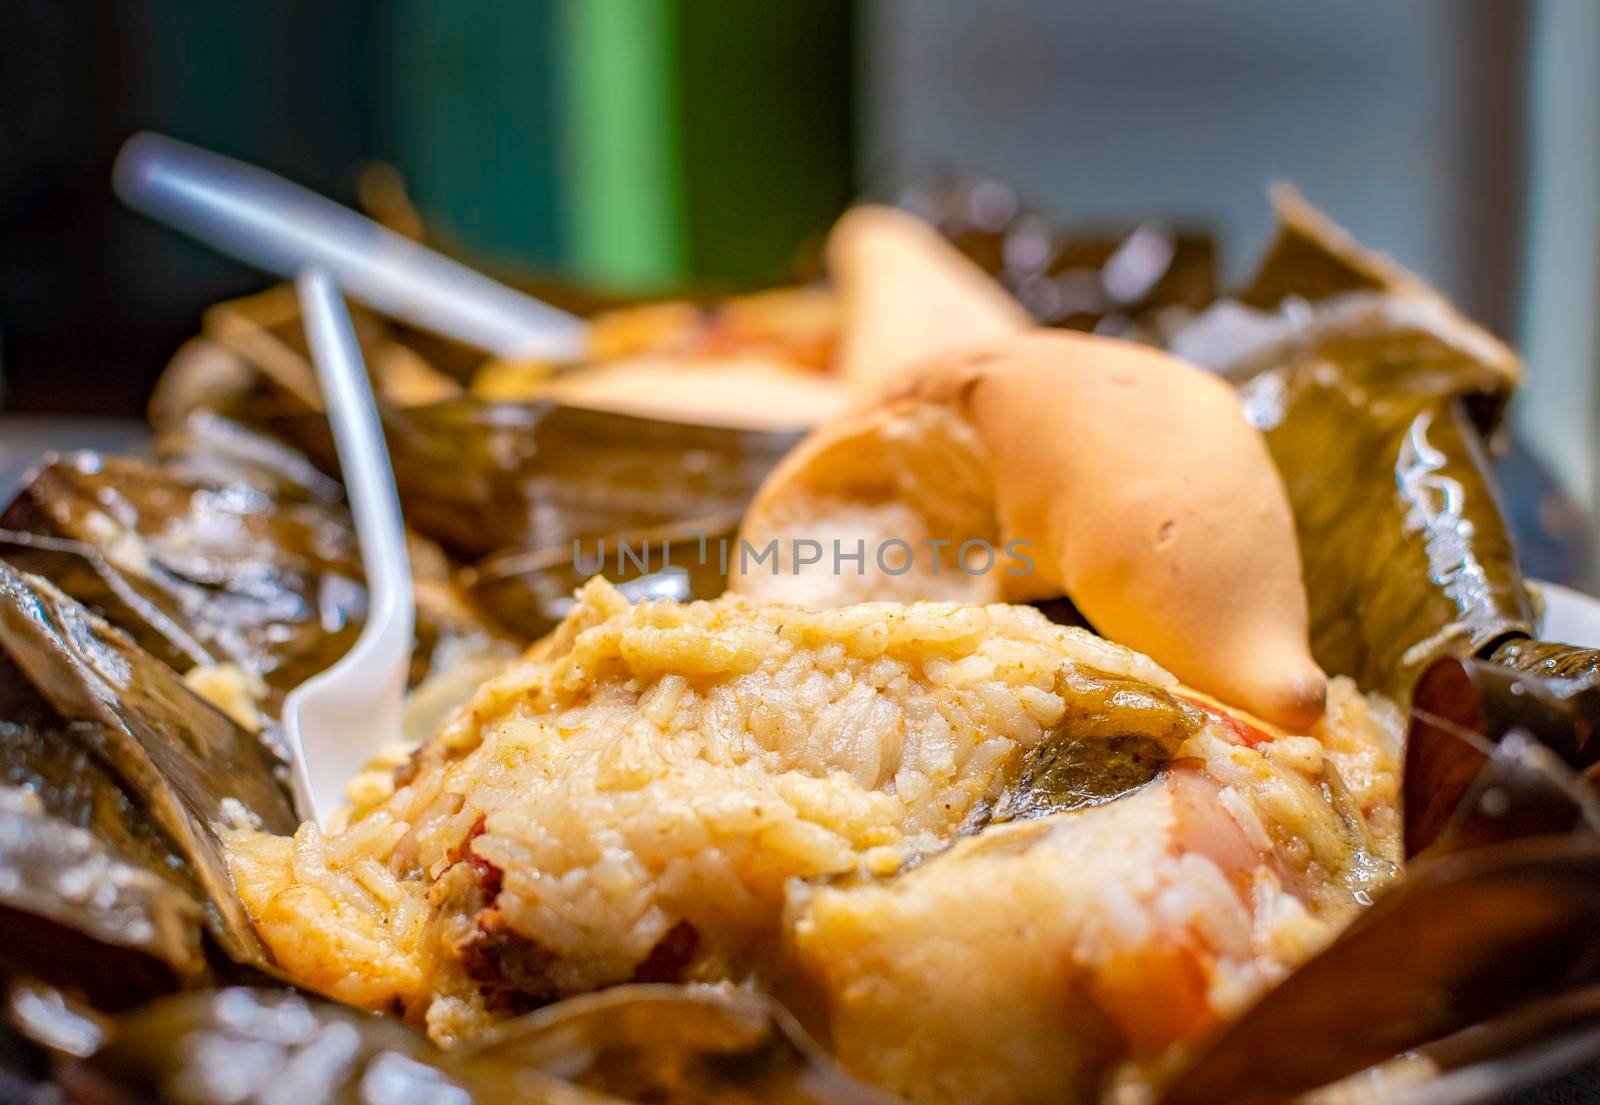 Nicaraguan Nacatamal with bread on the table, Nacatamal served with bread in a banana leaf on table. Traditional Nacatamal served in banana leaf, Traditional Venezuelan Hallaca served by isaiphoto